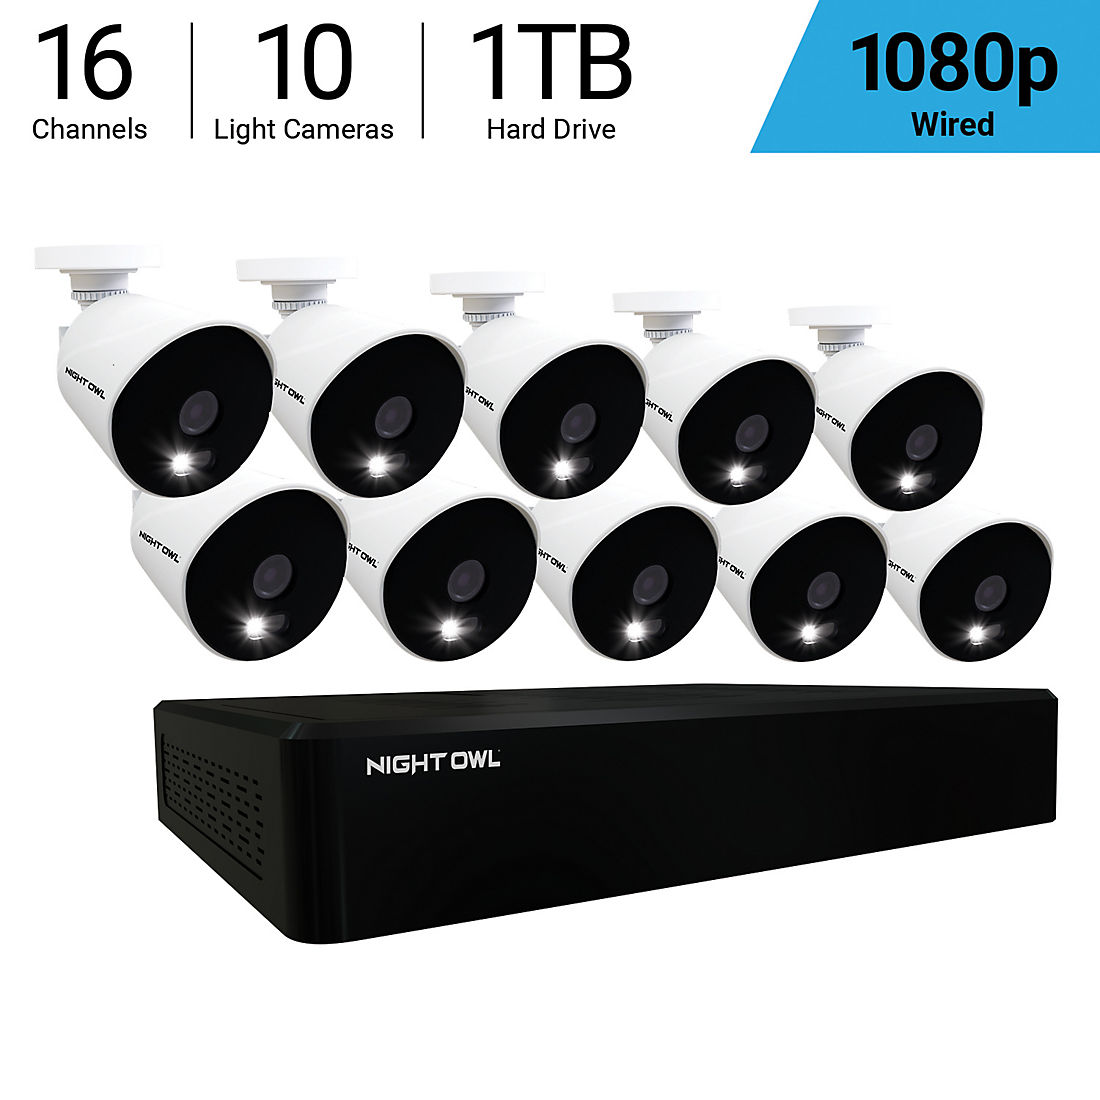 DVR ONLY, Compatible with Spotlight Cameras CAM-C20XL Night Owl 16-Channel 1080p HD DVR with 1 TB Hard Drive 